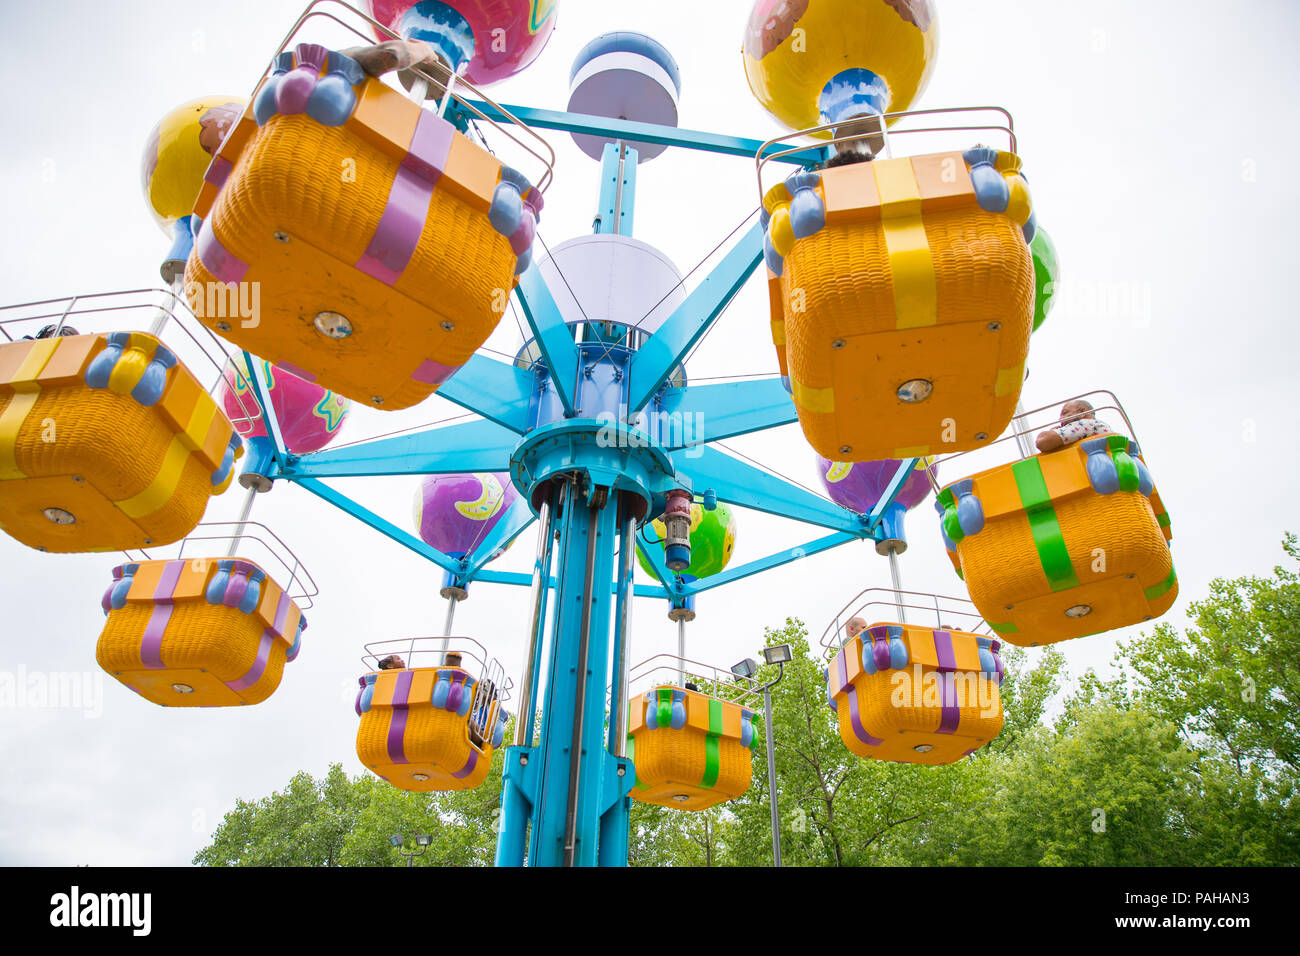 Langhorne, PA July 21, 2018: Sesame Place is a children's theme park, located on the outskirts of Philadelphia, Stock Photo